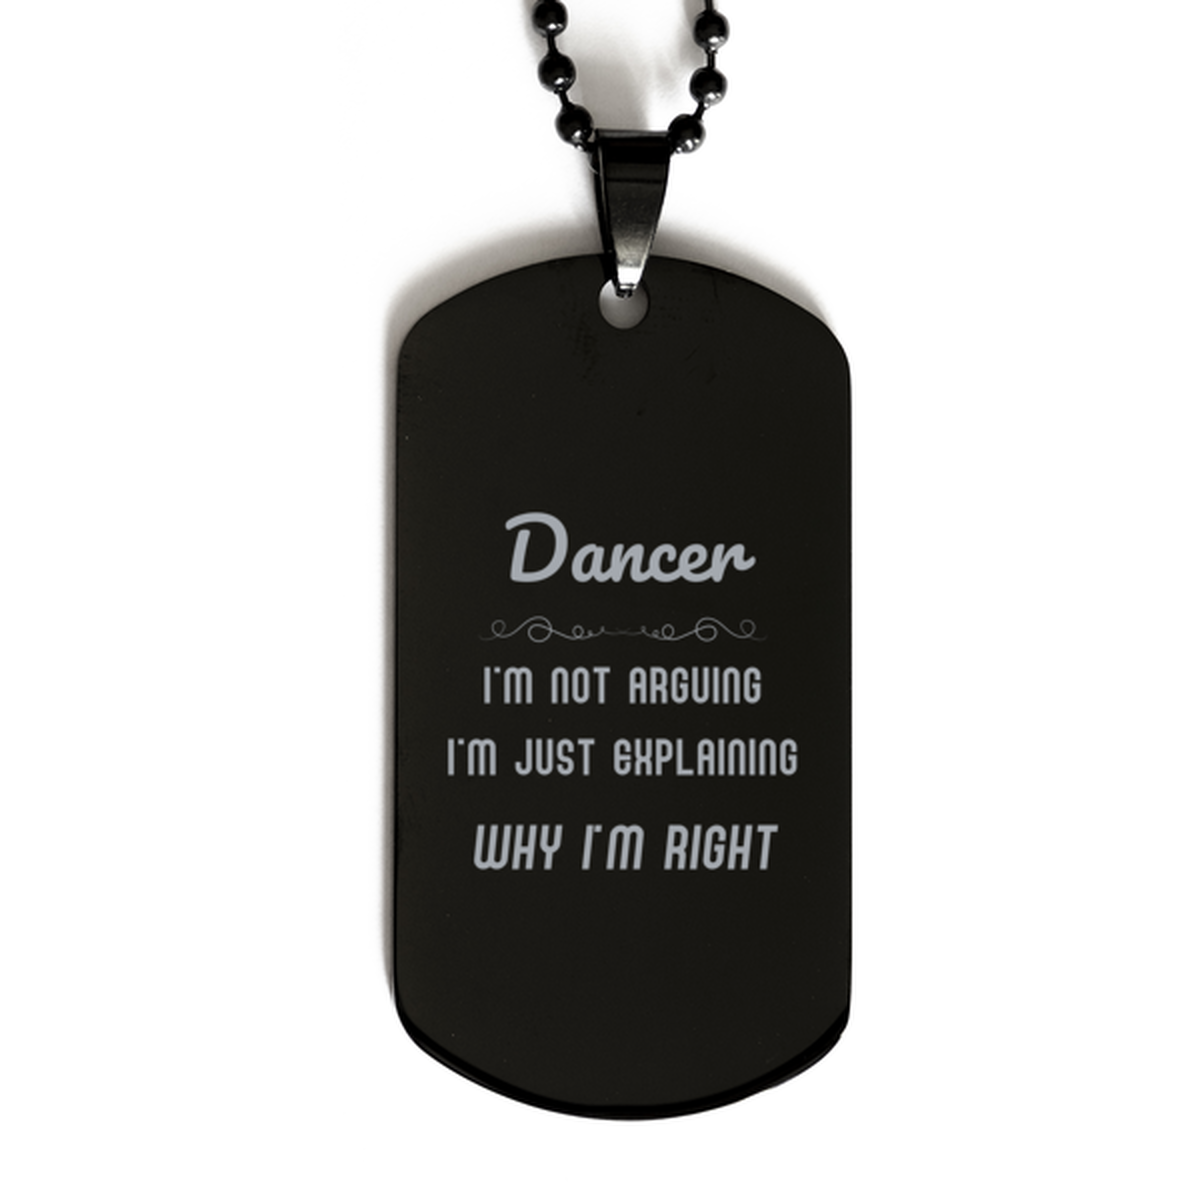 Dancer I'm not Arguing. I'm Just Explaining Why I'm RIGHT Black Dog Tag, Funny Saying Quote Dancer Gifts For Dancer Graduation Birthday Christmas Gifts for Men Women Coworker